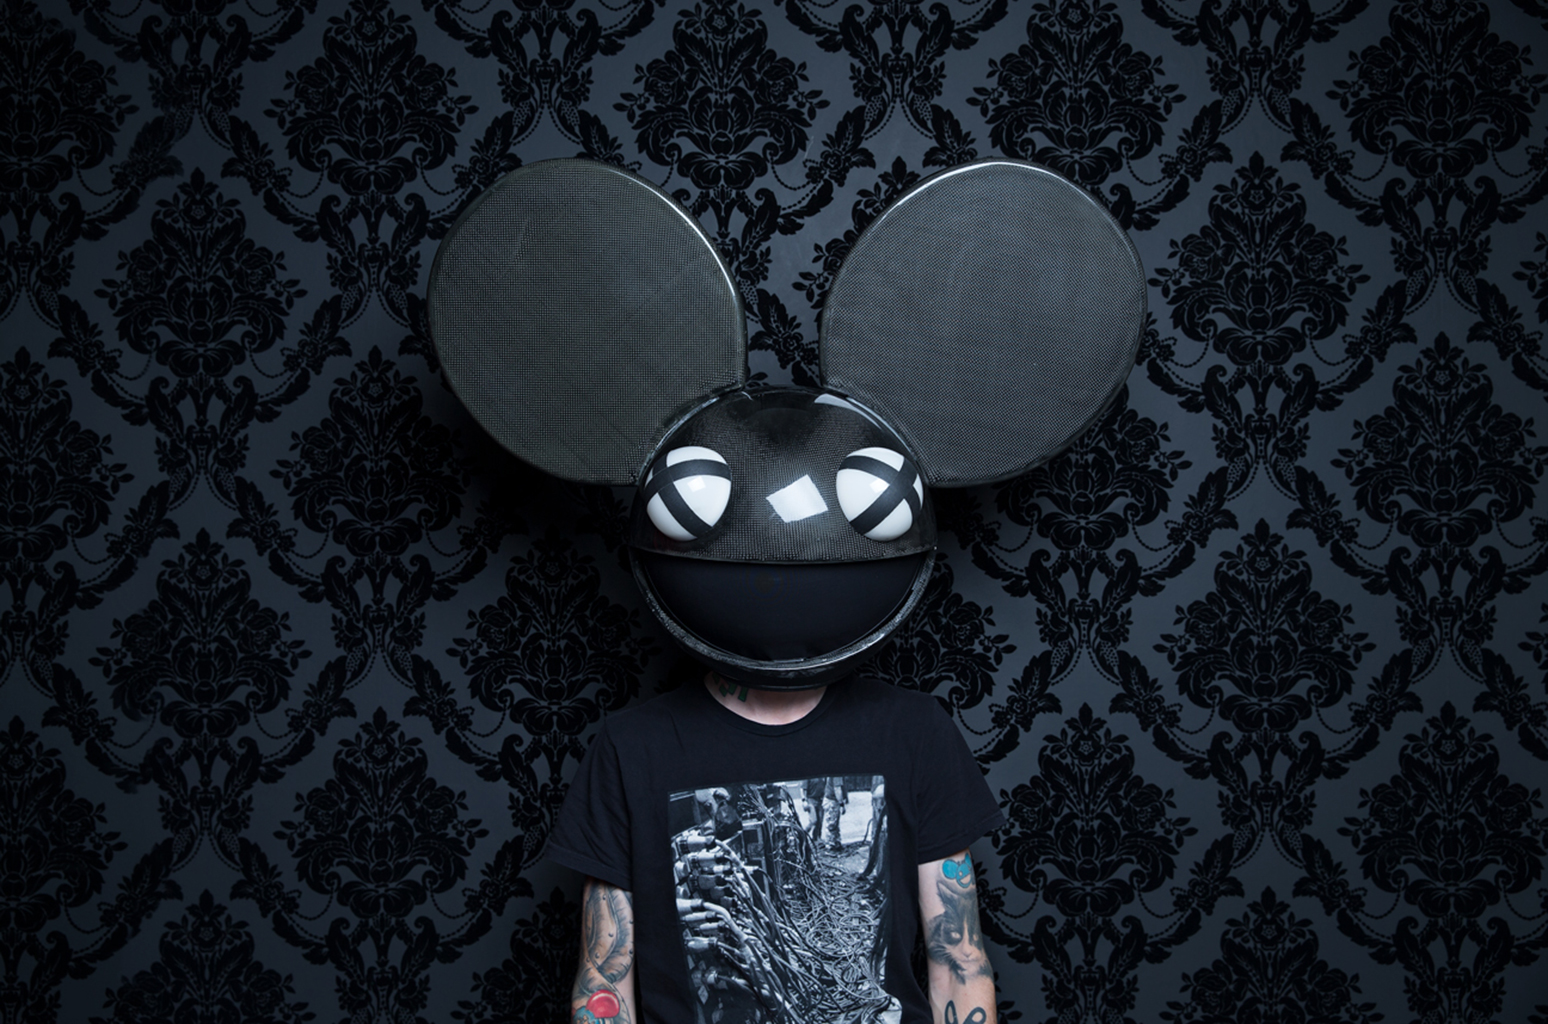 [ELECTRONIC] deadmau5 Releases ‘stuff i used to do’ – 13 New Tracks For Free